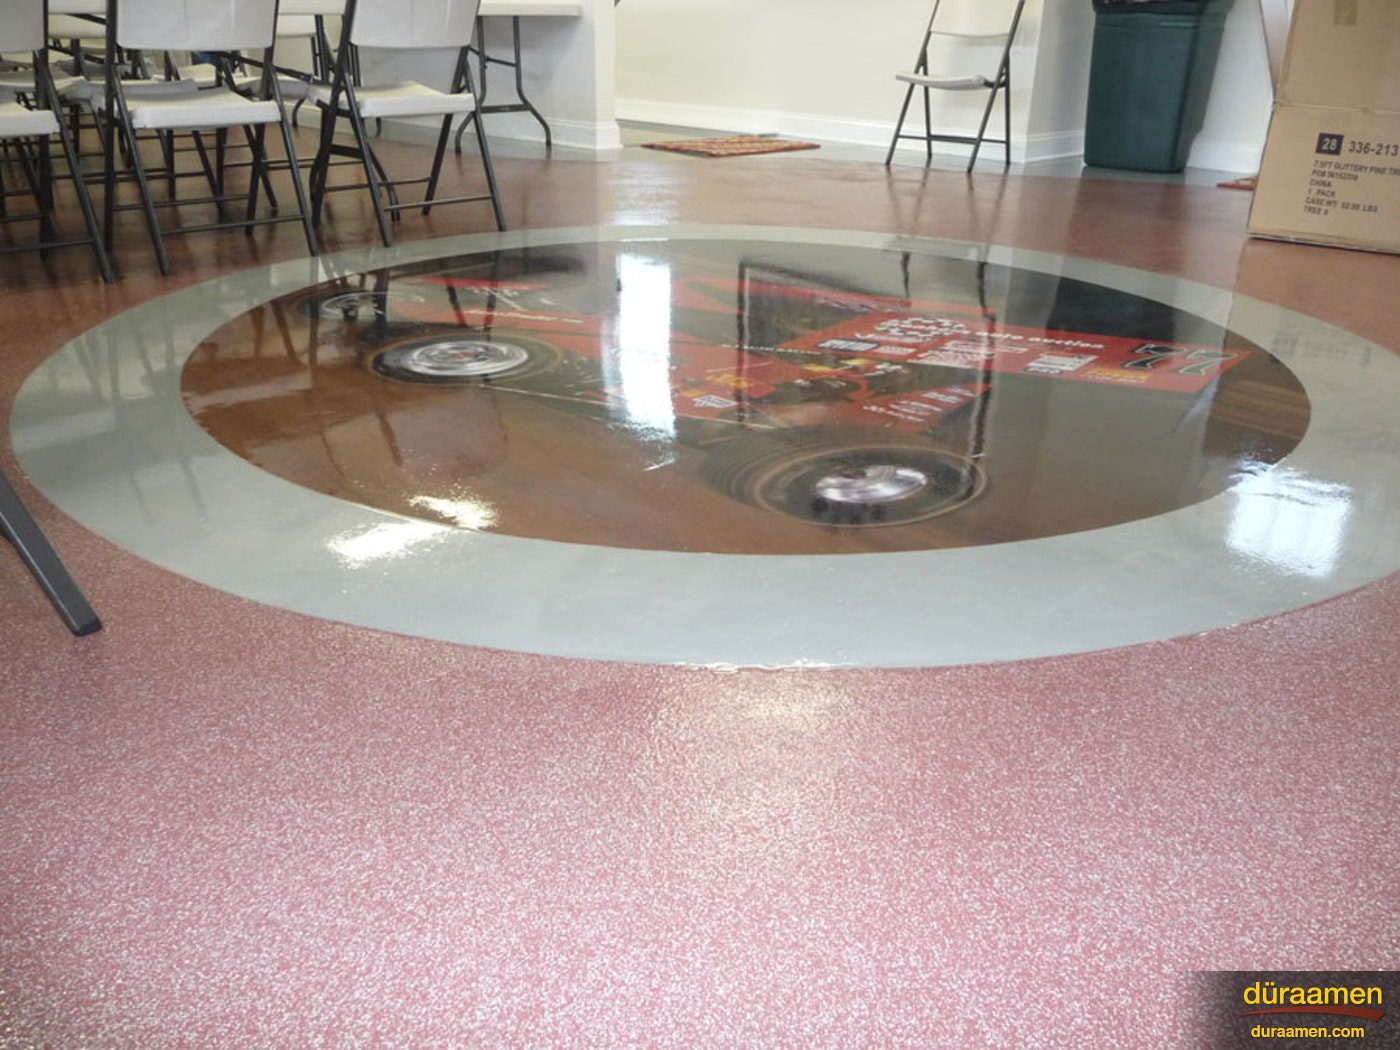 Garage floor epoxy coatings are ideal for meeting rooms as they offer protection and from and easy clean up of spills and liquidsnbspVinyl Chips flooring in a meeting hall in Harrisburg PA | Duraamen Engineered Products Inc